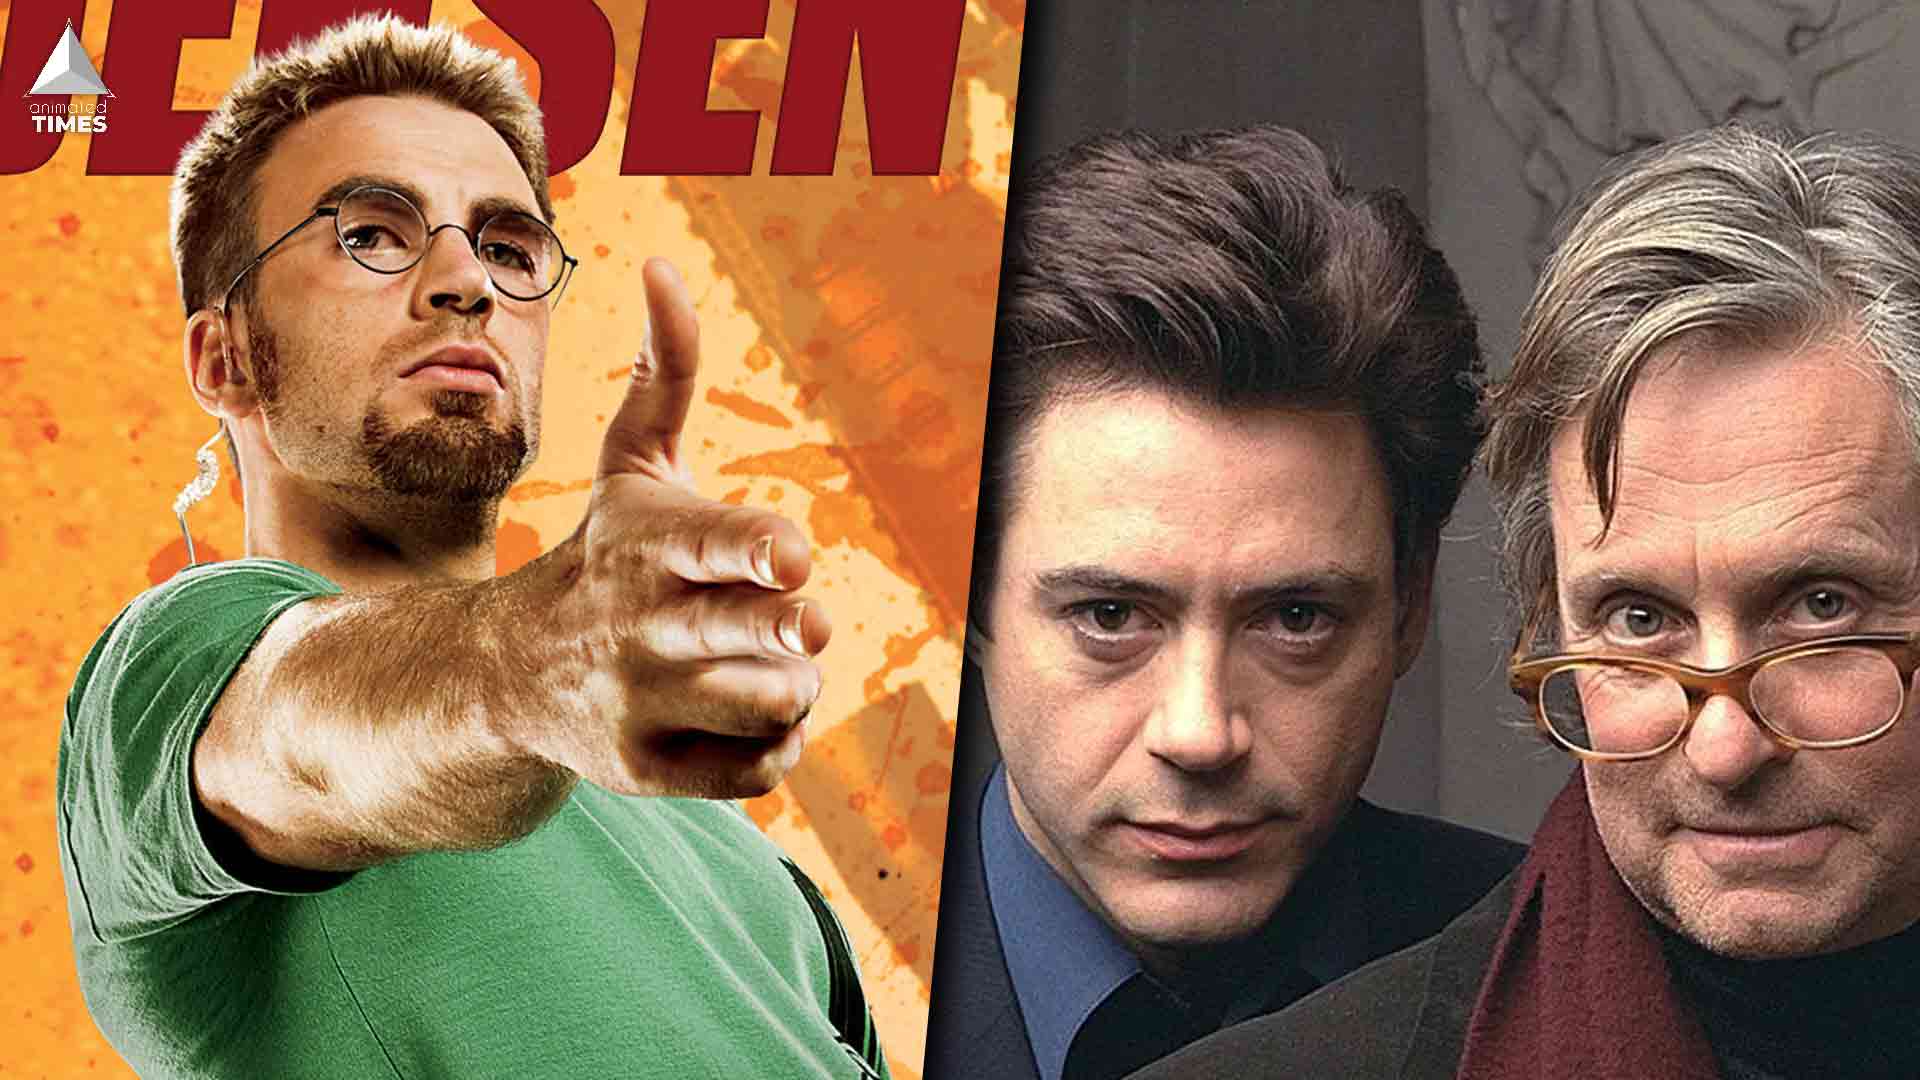 8 Times Fans Didn’t Notice Superhero Actors Starring Together Before Being Superheroes